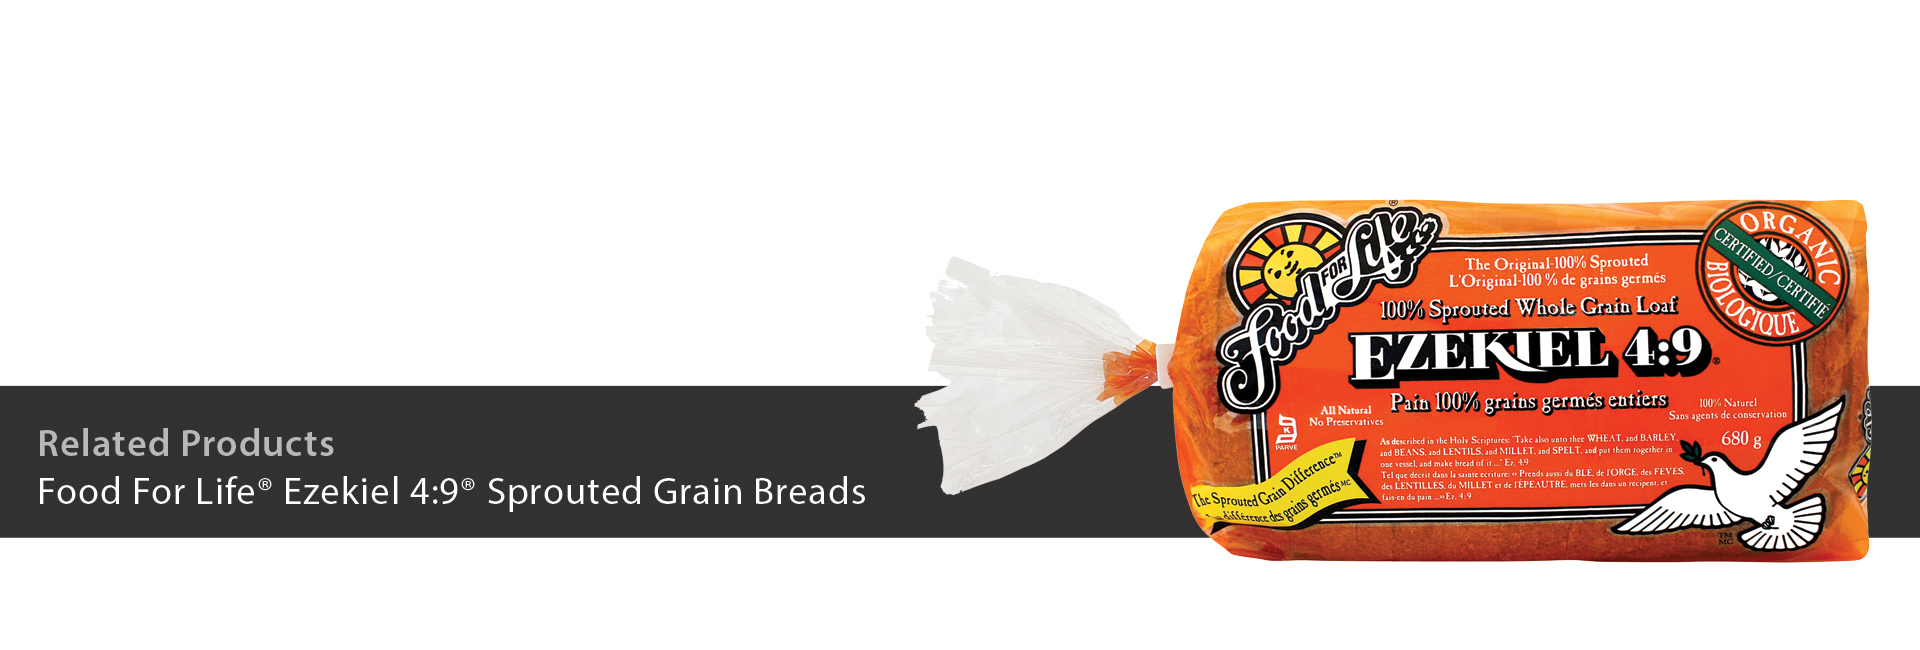 Food For Life Ezekiel 4:9 Sprouted Grain Breads